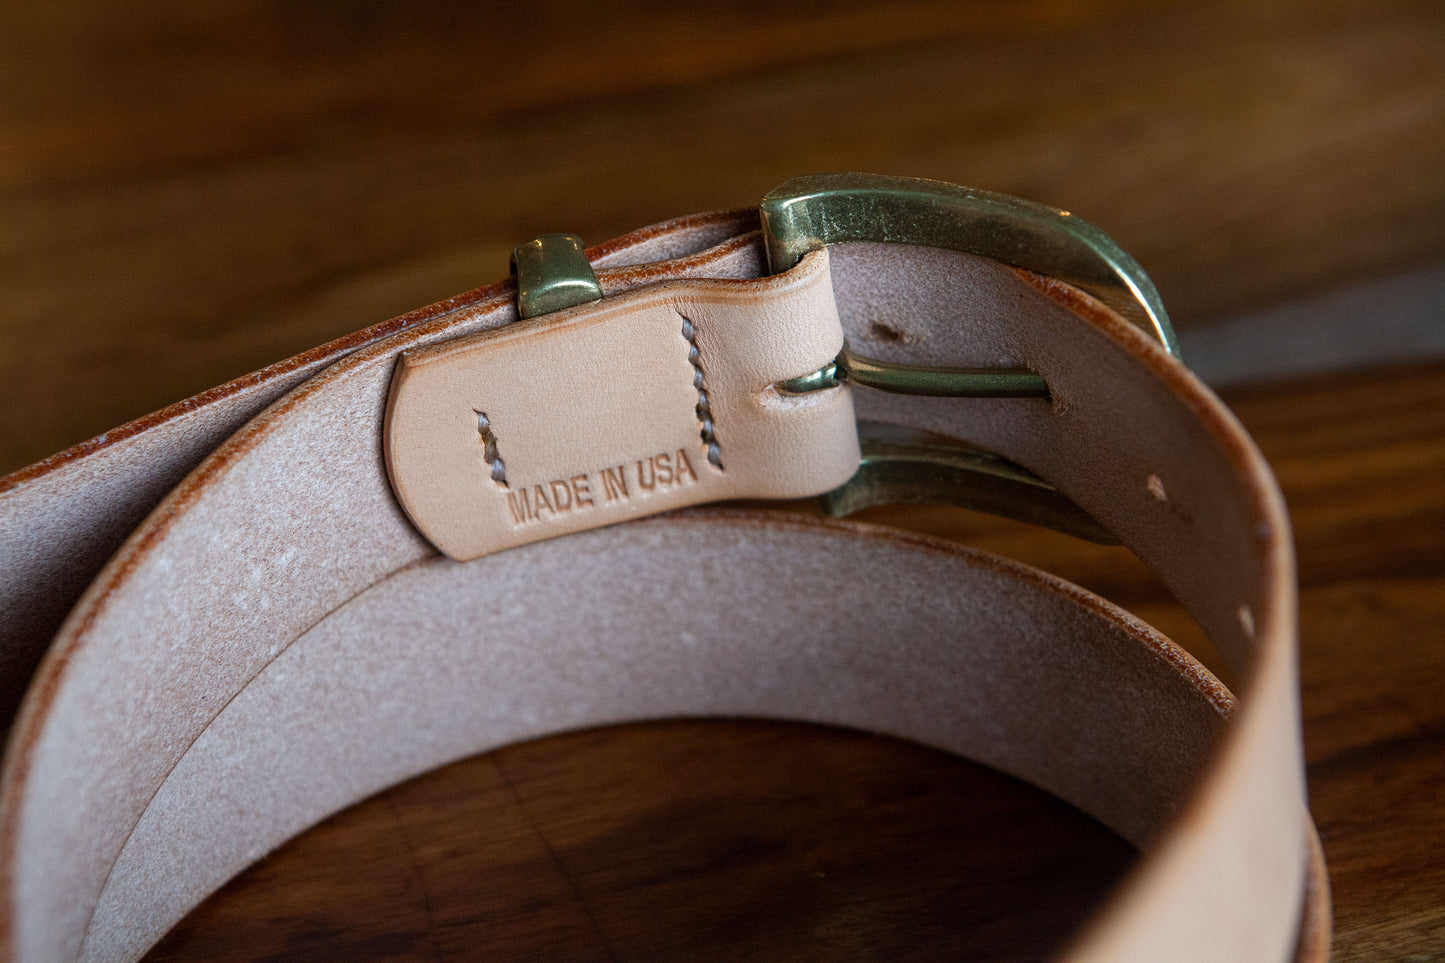 35mm Hammered Japanese Brass Belt - You choose the leather!